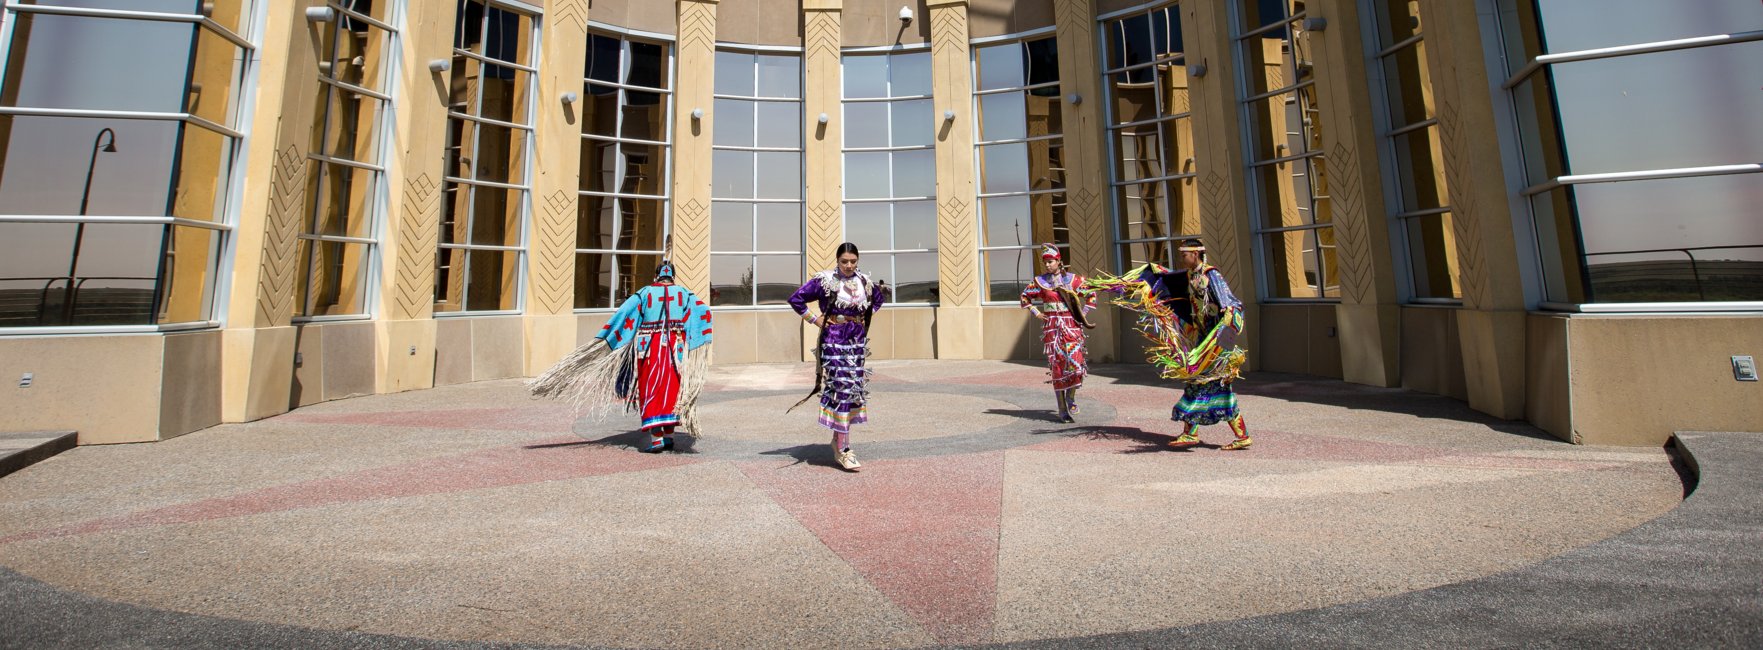 Siksika Blackfoot dancers in front of the Blackfoot Crossing Historical Park Interpretive Centre.